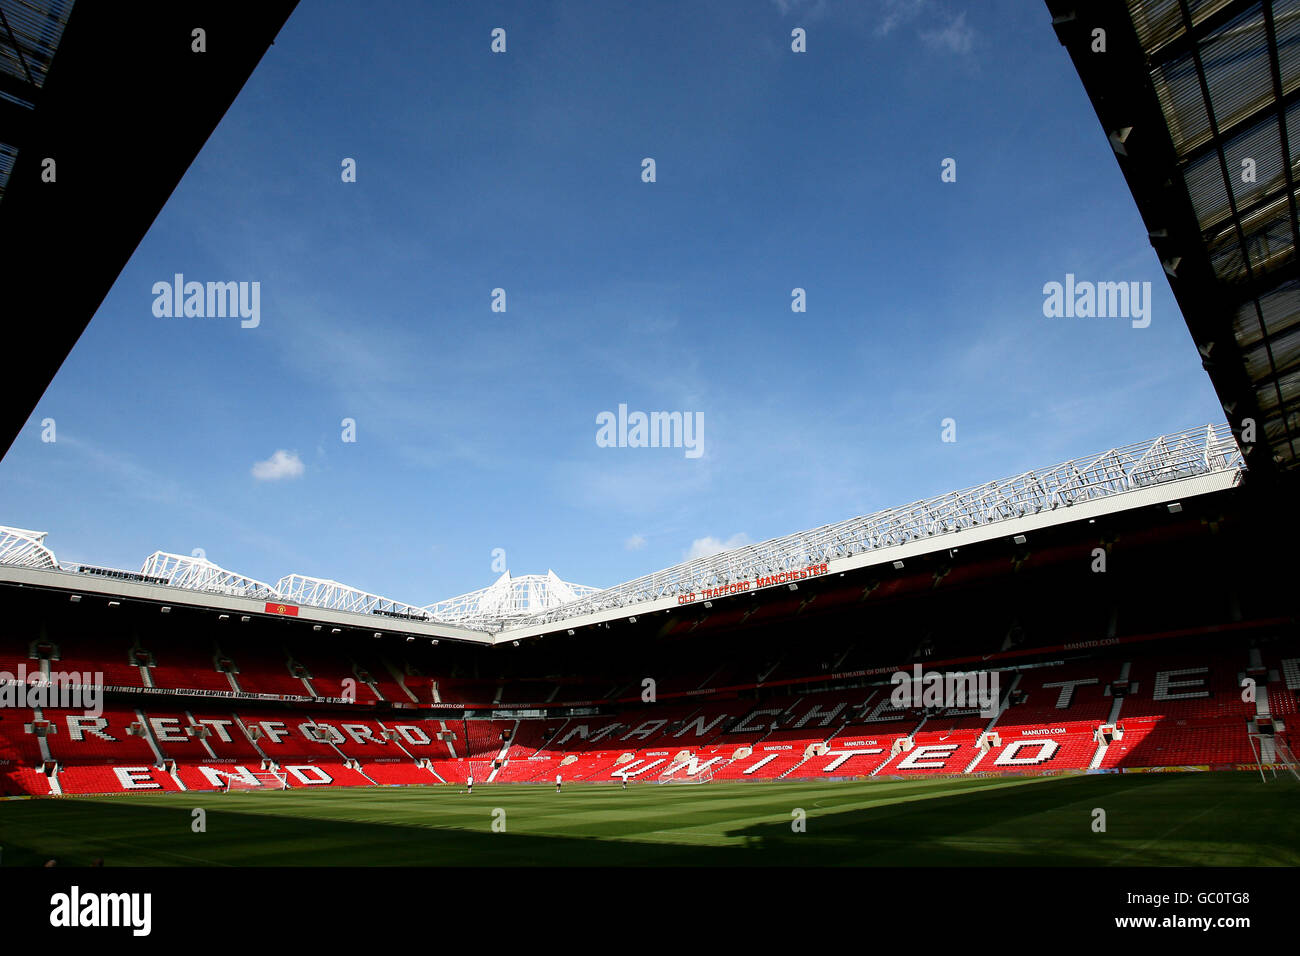 Football - Manchester United Session de formation - Old Trafford Banque D'Images